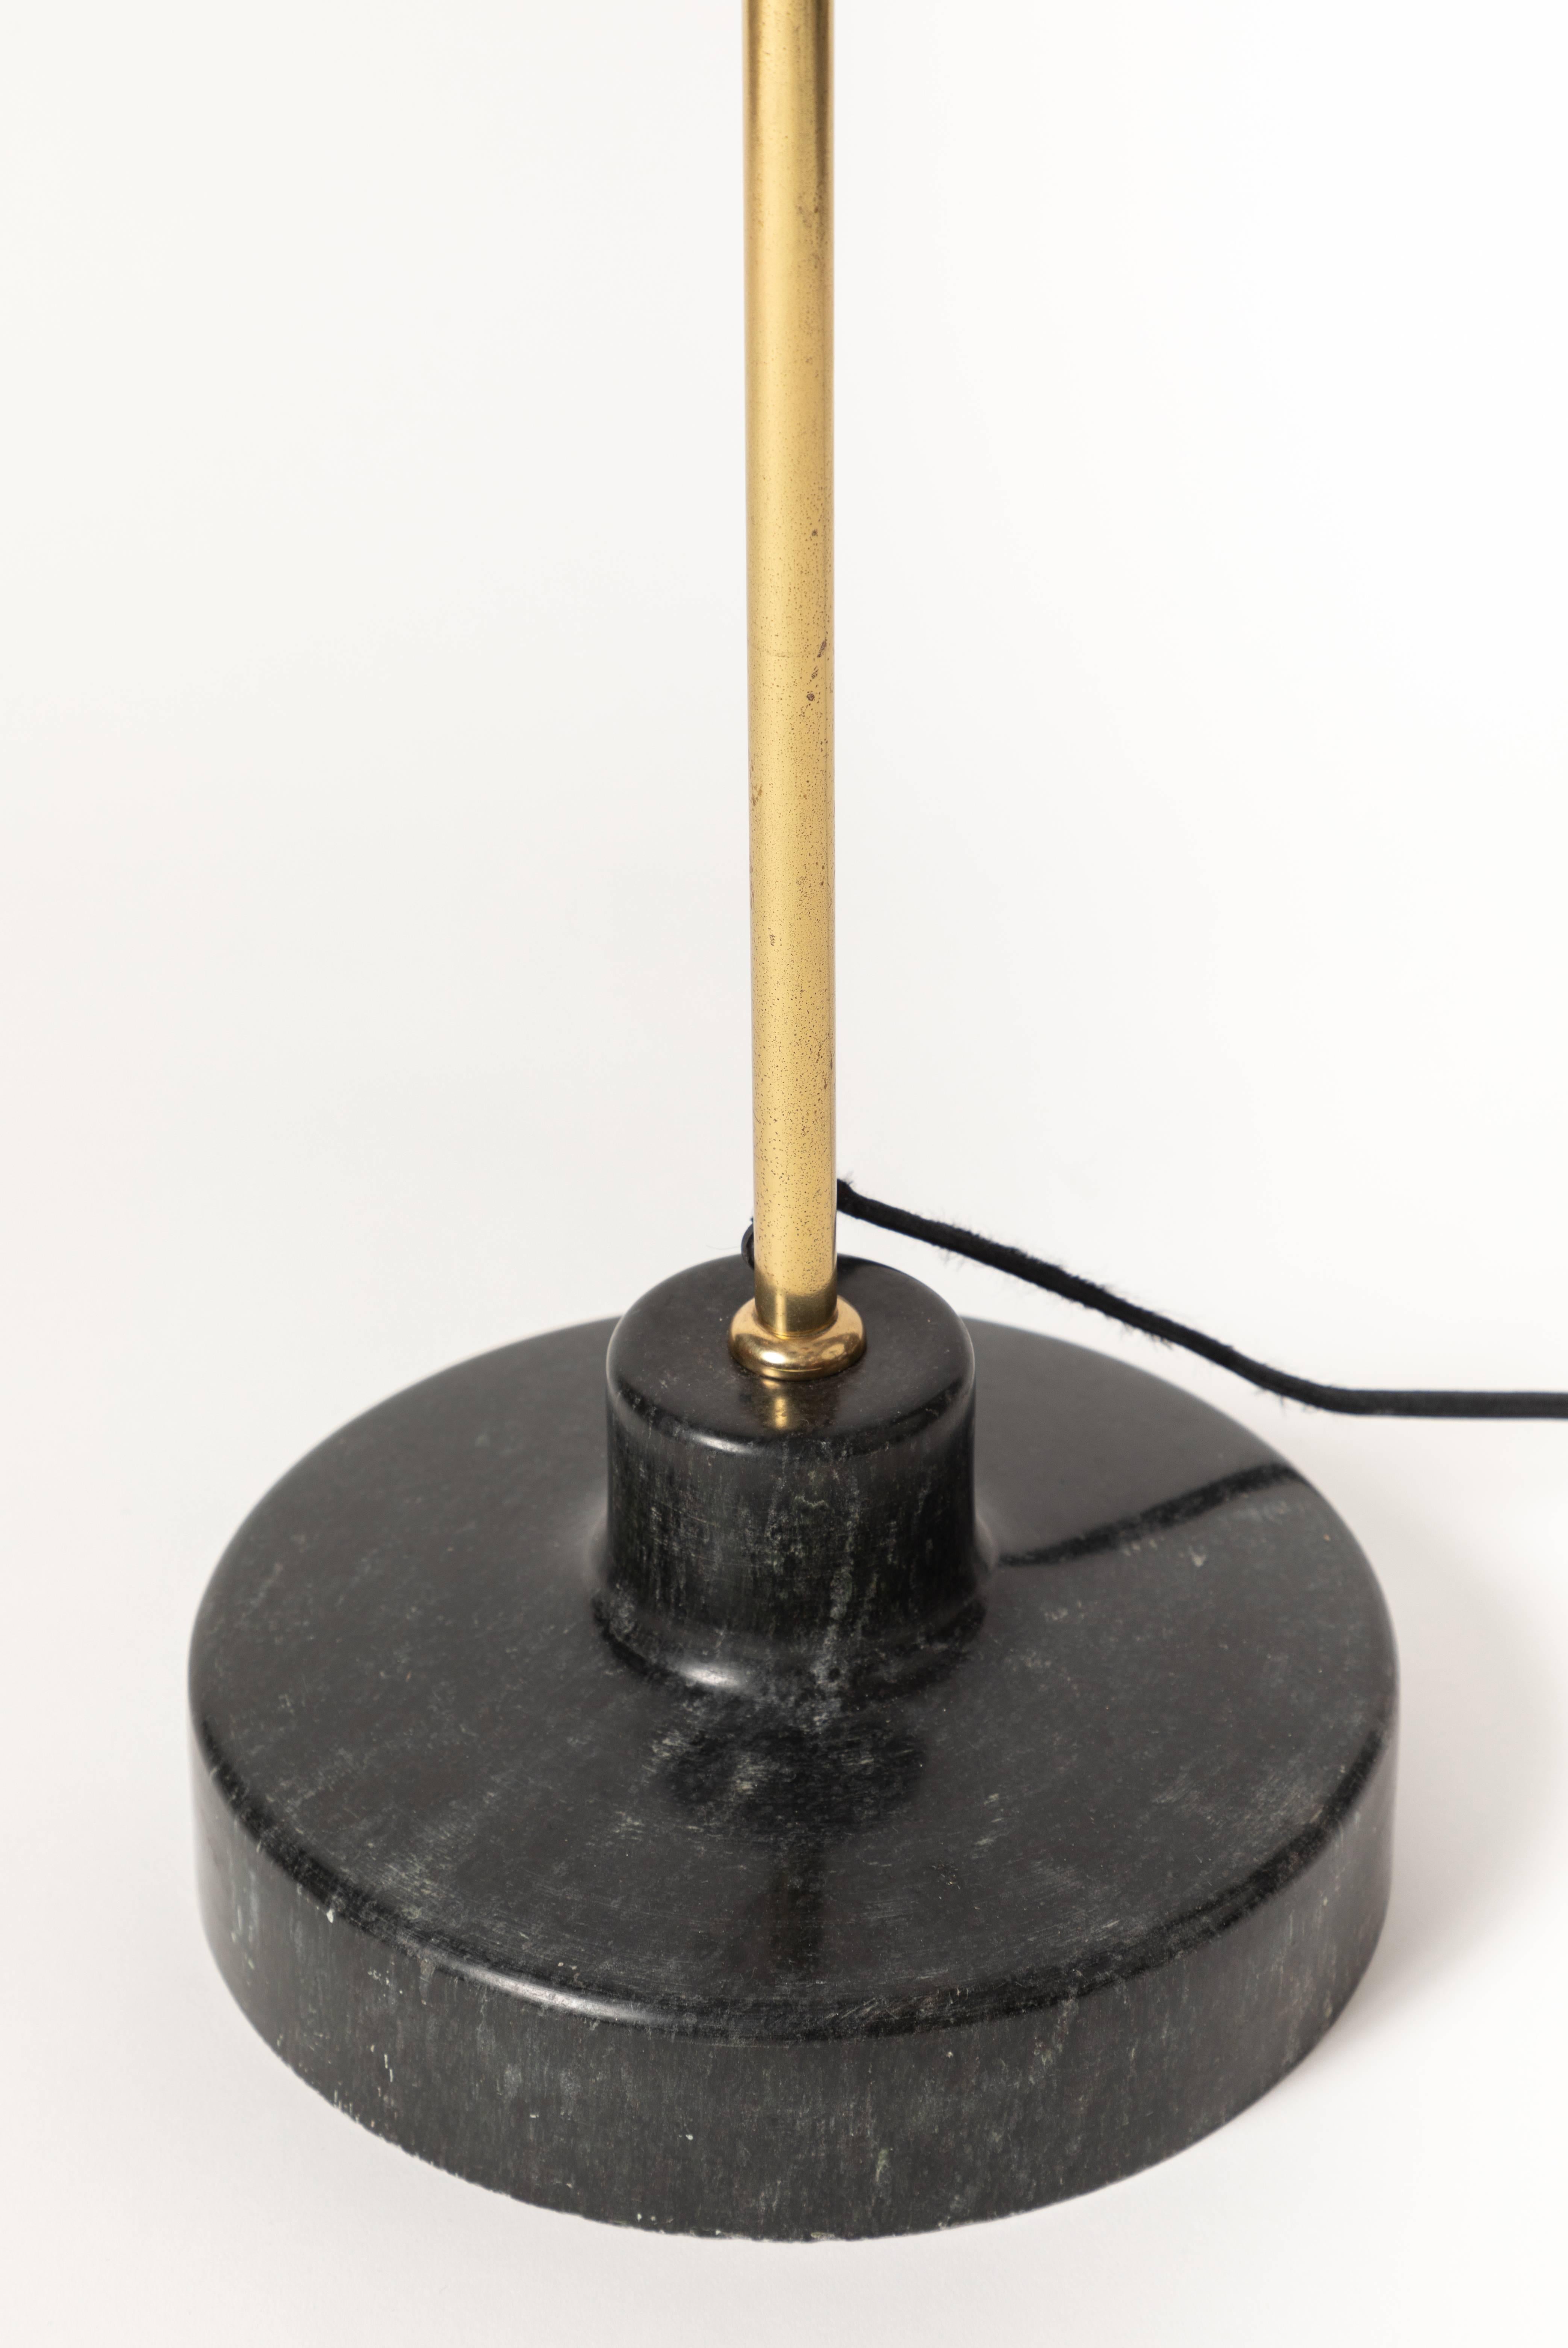 1950s Ignazio Gardella LT6 floor lamp for Azucena. This iconic and rare floor lamp is executed in brass, pressed glass, black painted metal with a solid black marble base. An incredibly refined and remarkably modern vintage midcentury floor lamp by